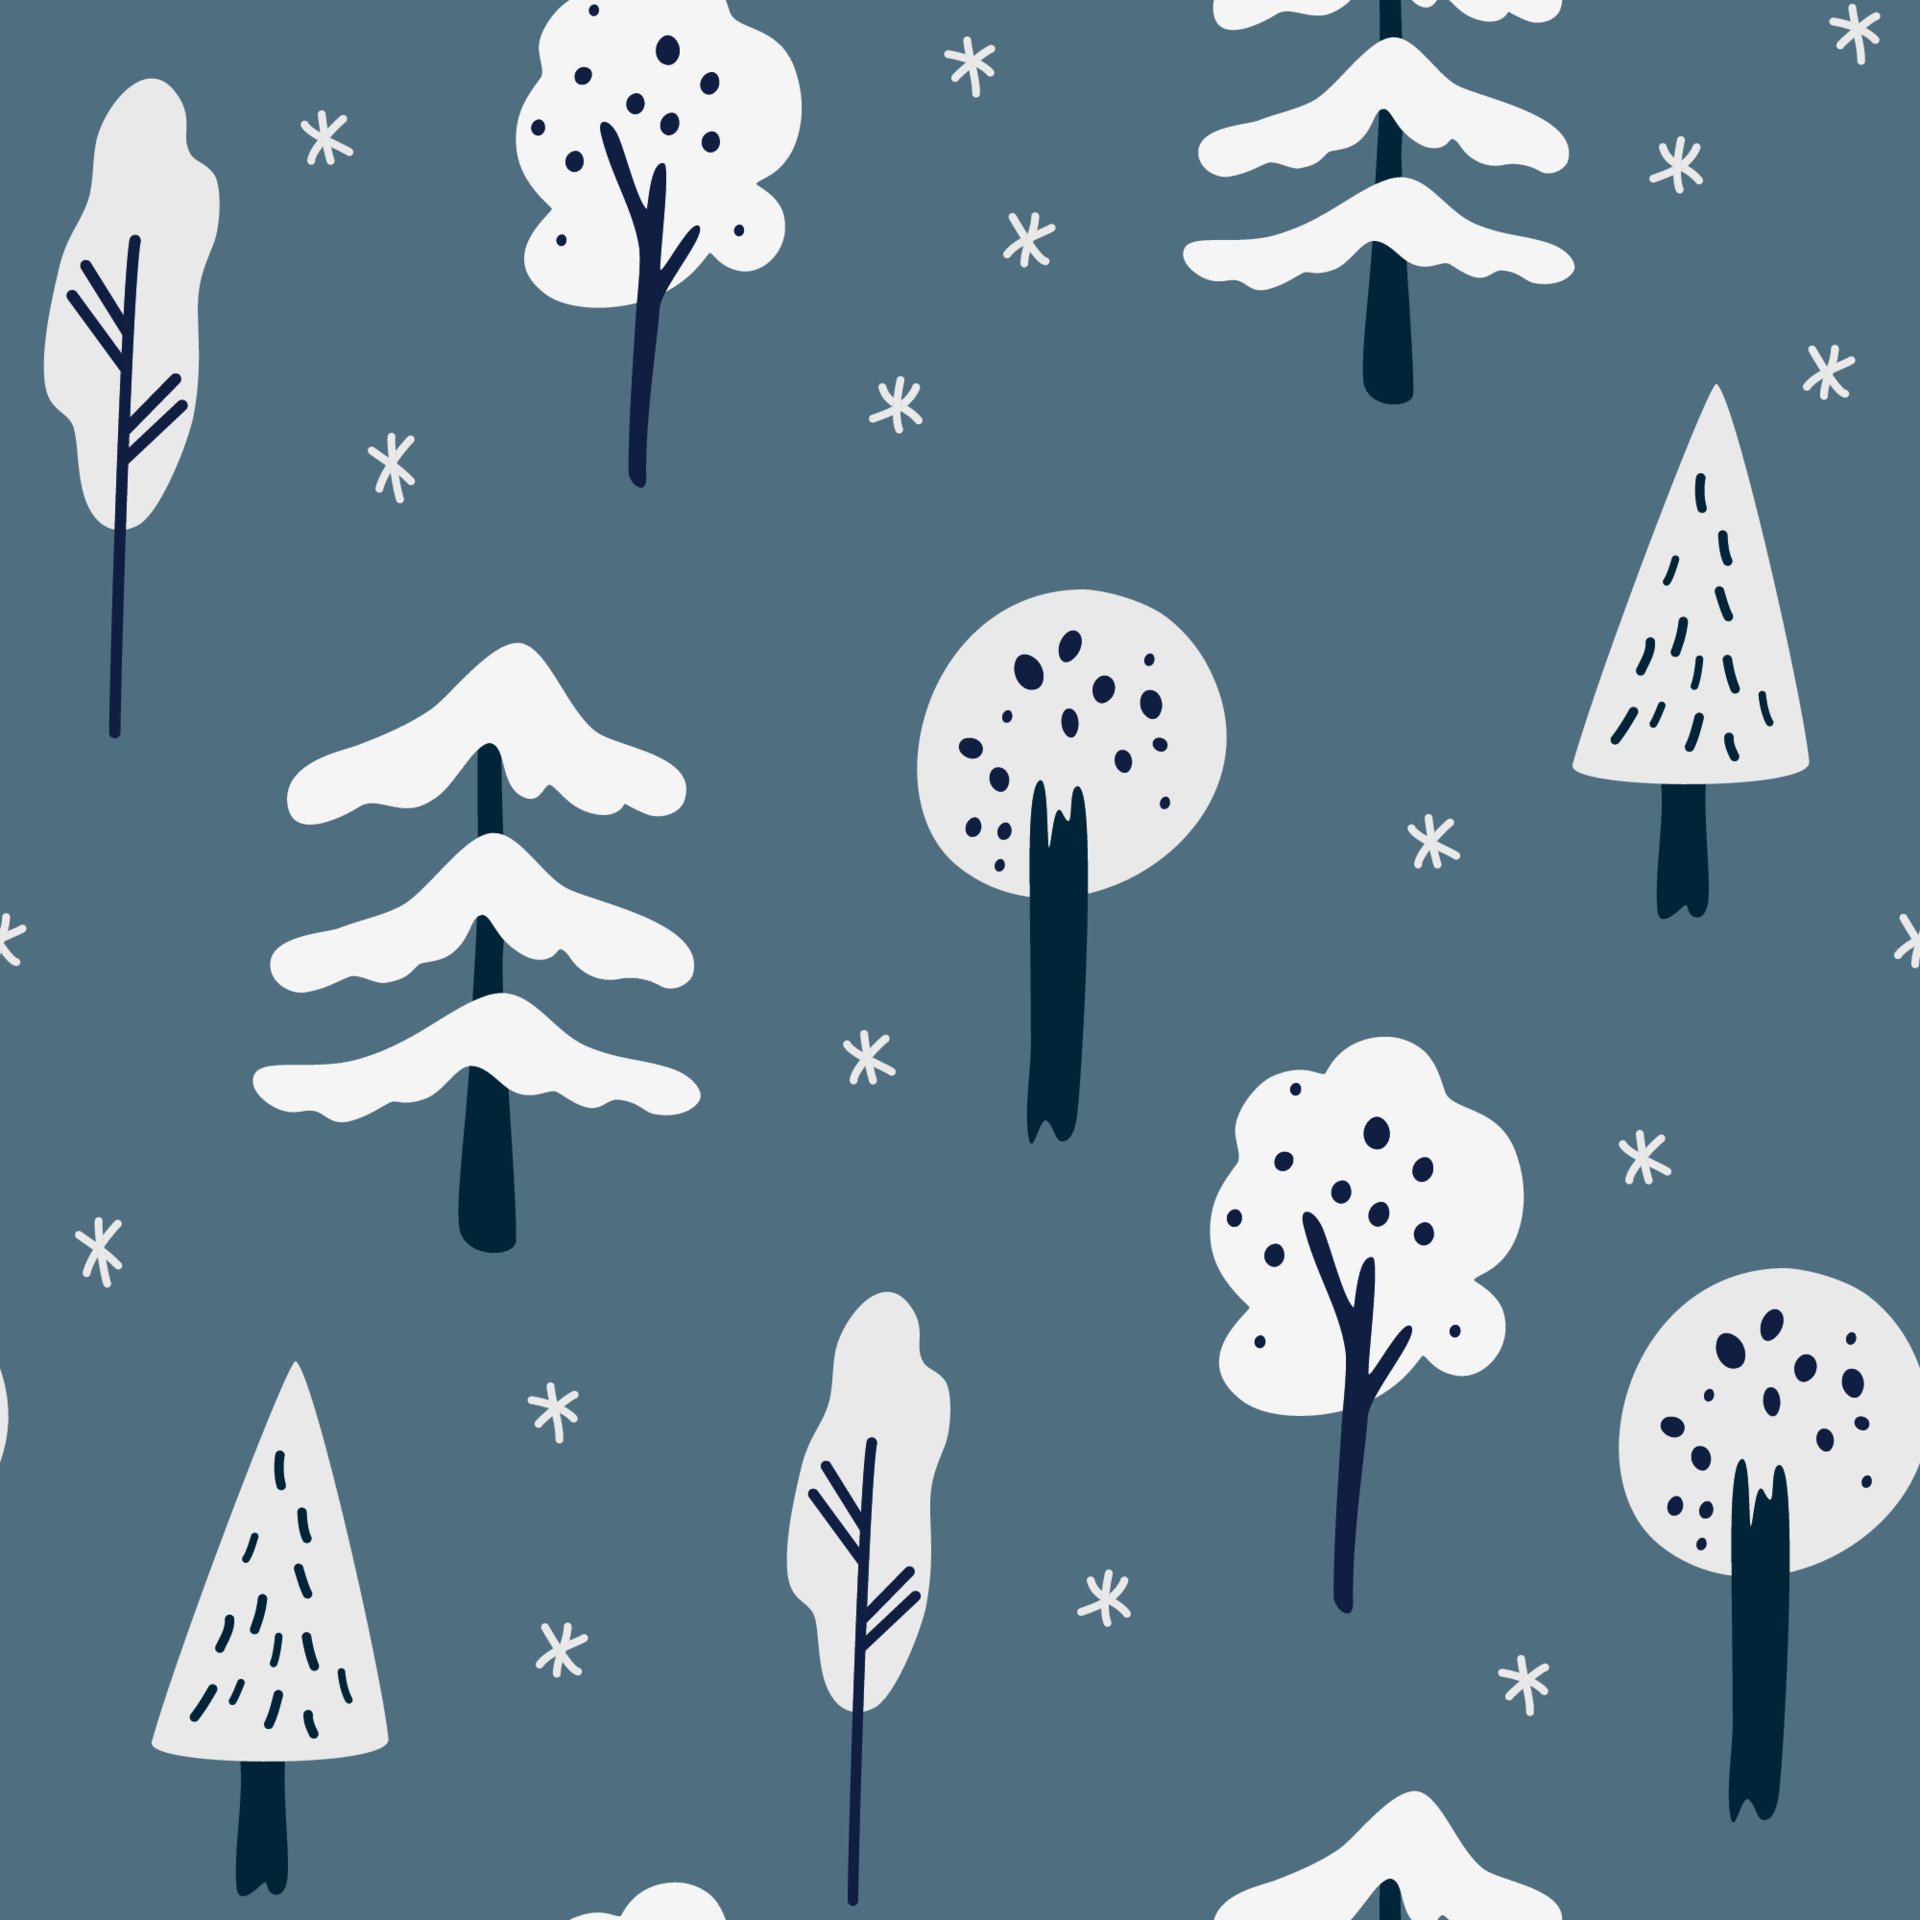 Winter forest seamless pattern. Christmas trees, snowflakes and trees. Winter landscape in Scandinavian style. Holiday decoration background for wallpaper, clothing, packaging invitations, posters